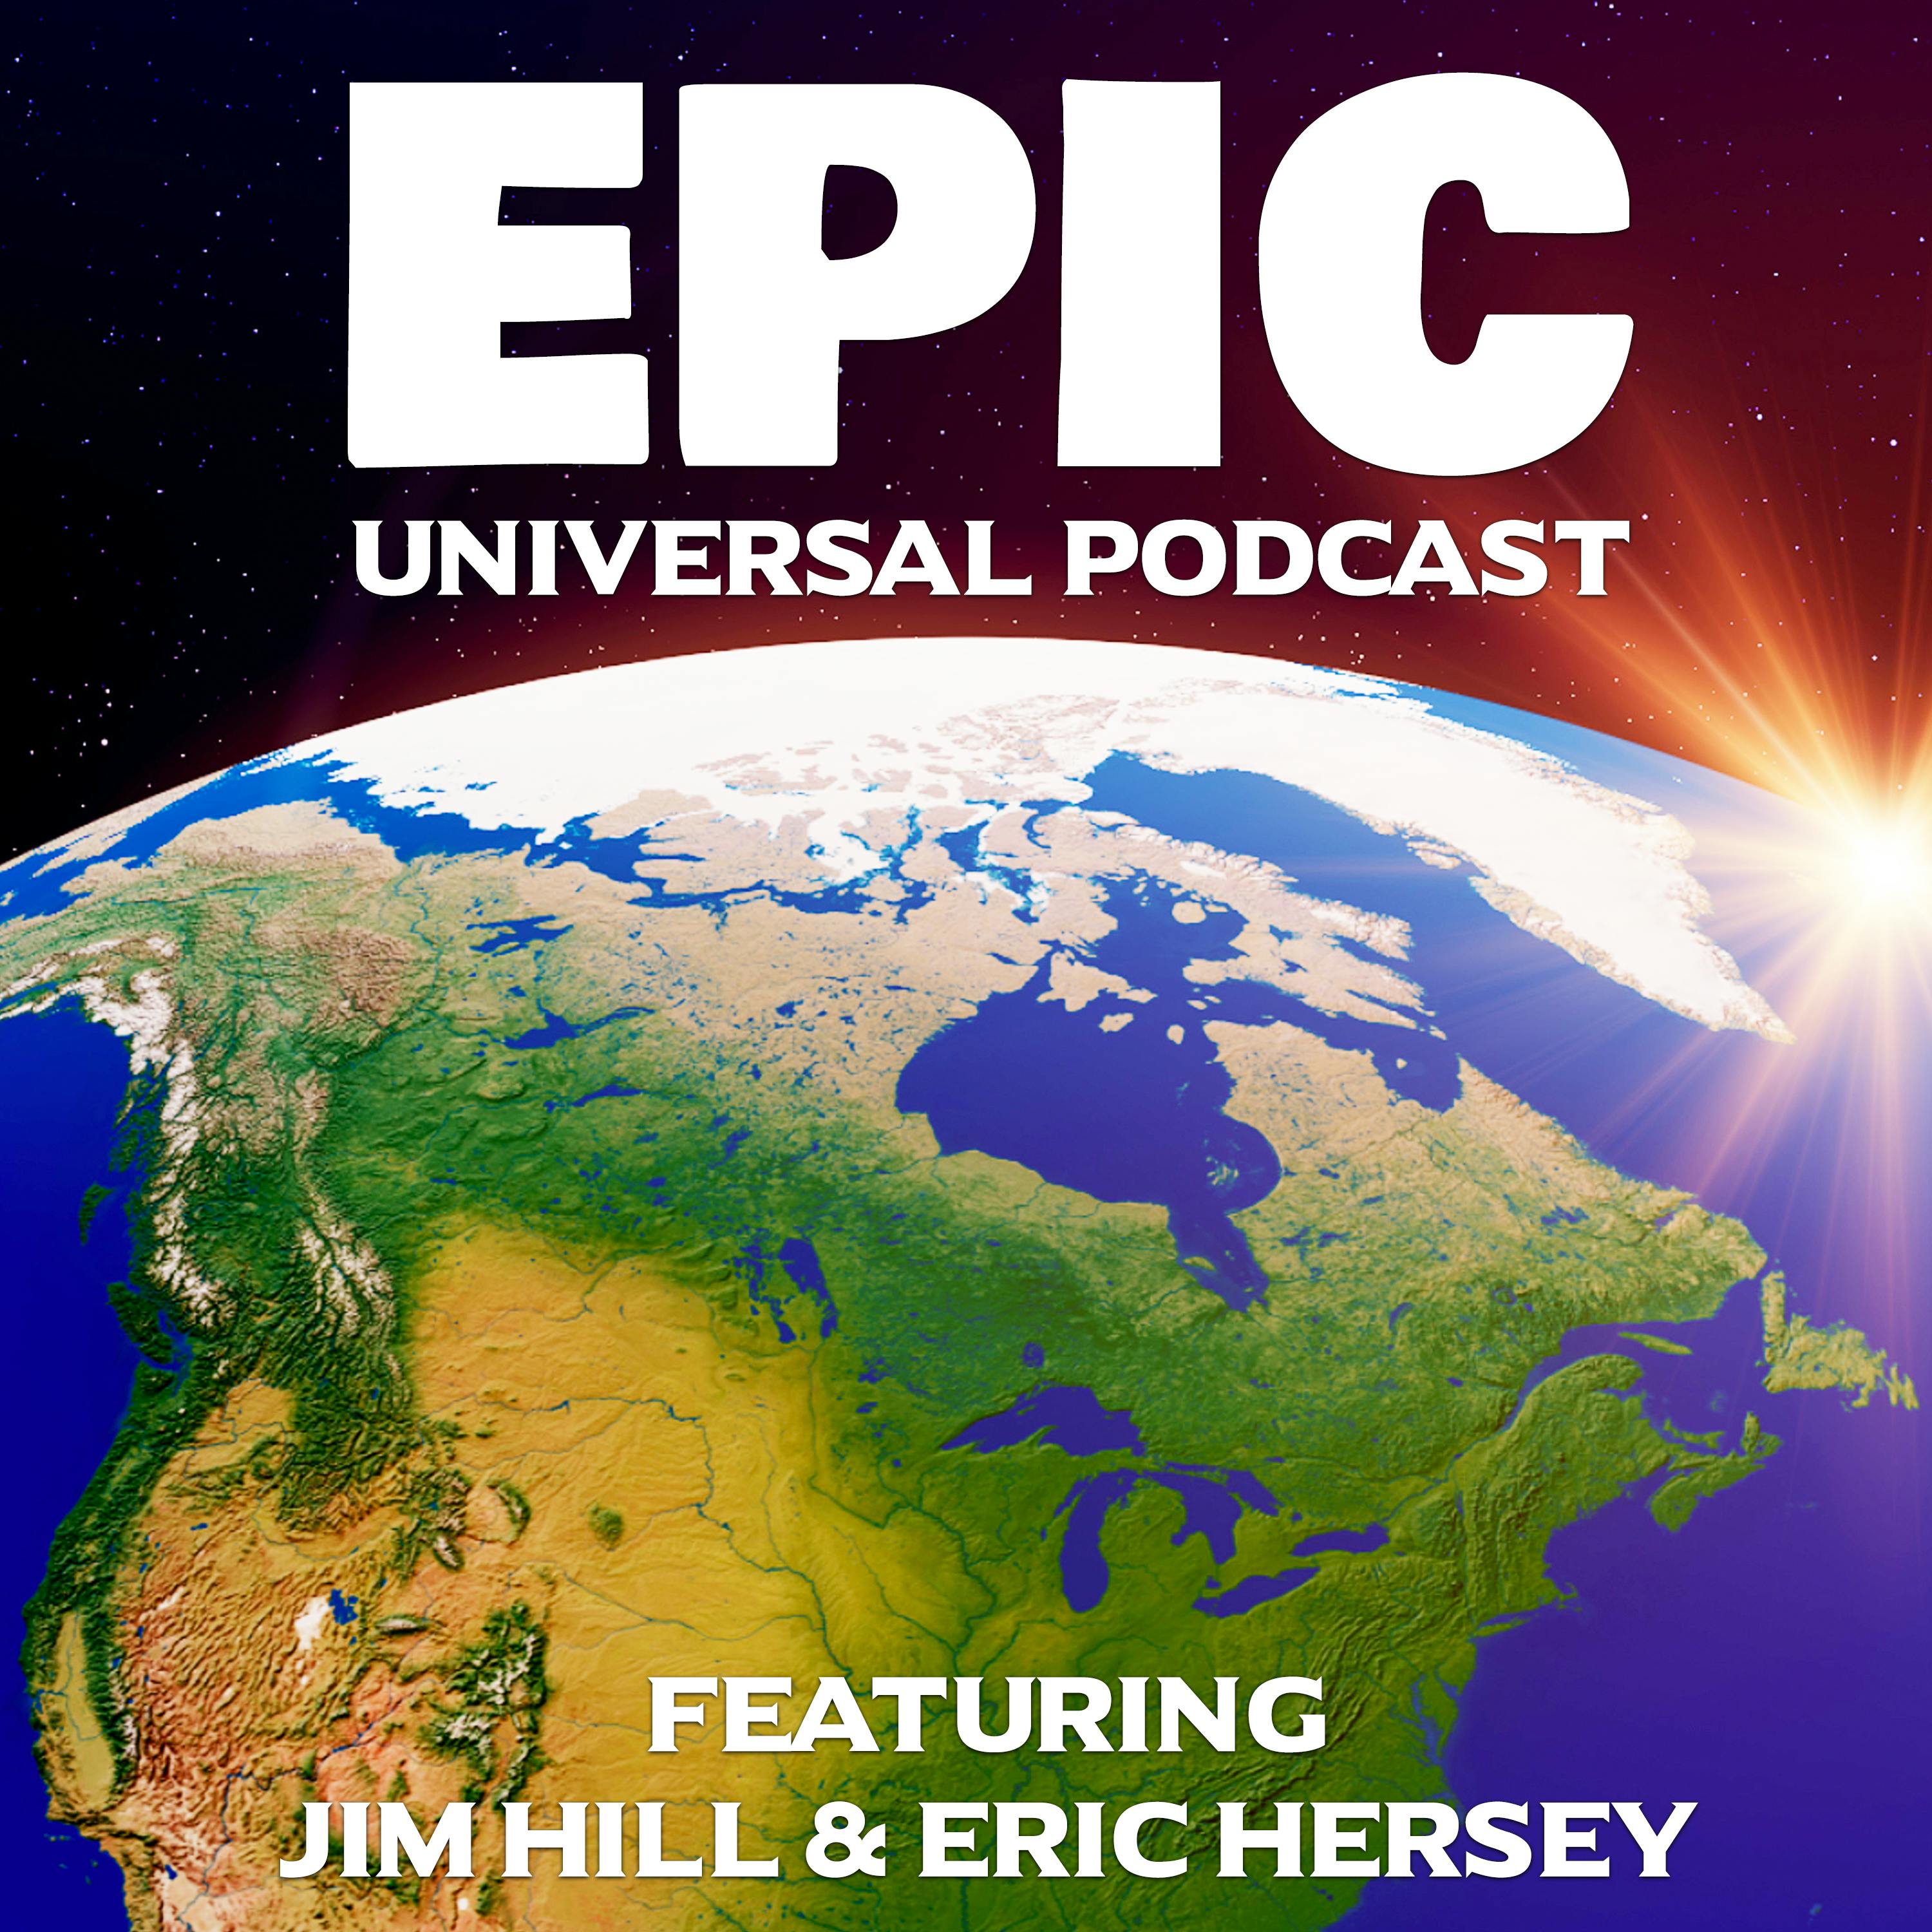 Epic Universal with Eric Hersey Ep 47-1:  Introducing the Epic Universal Podcast